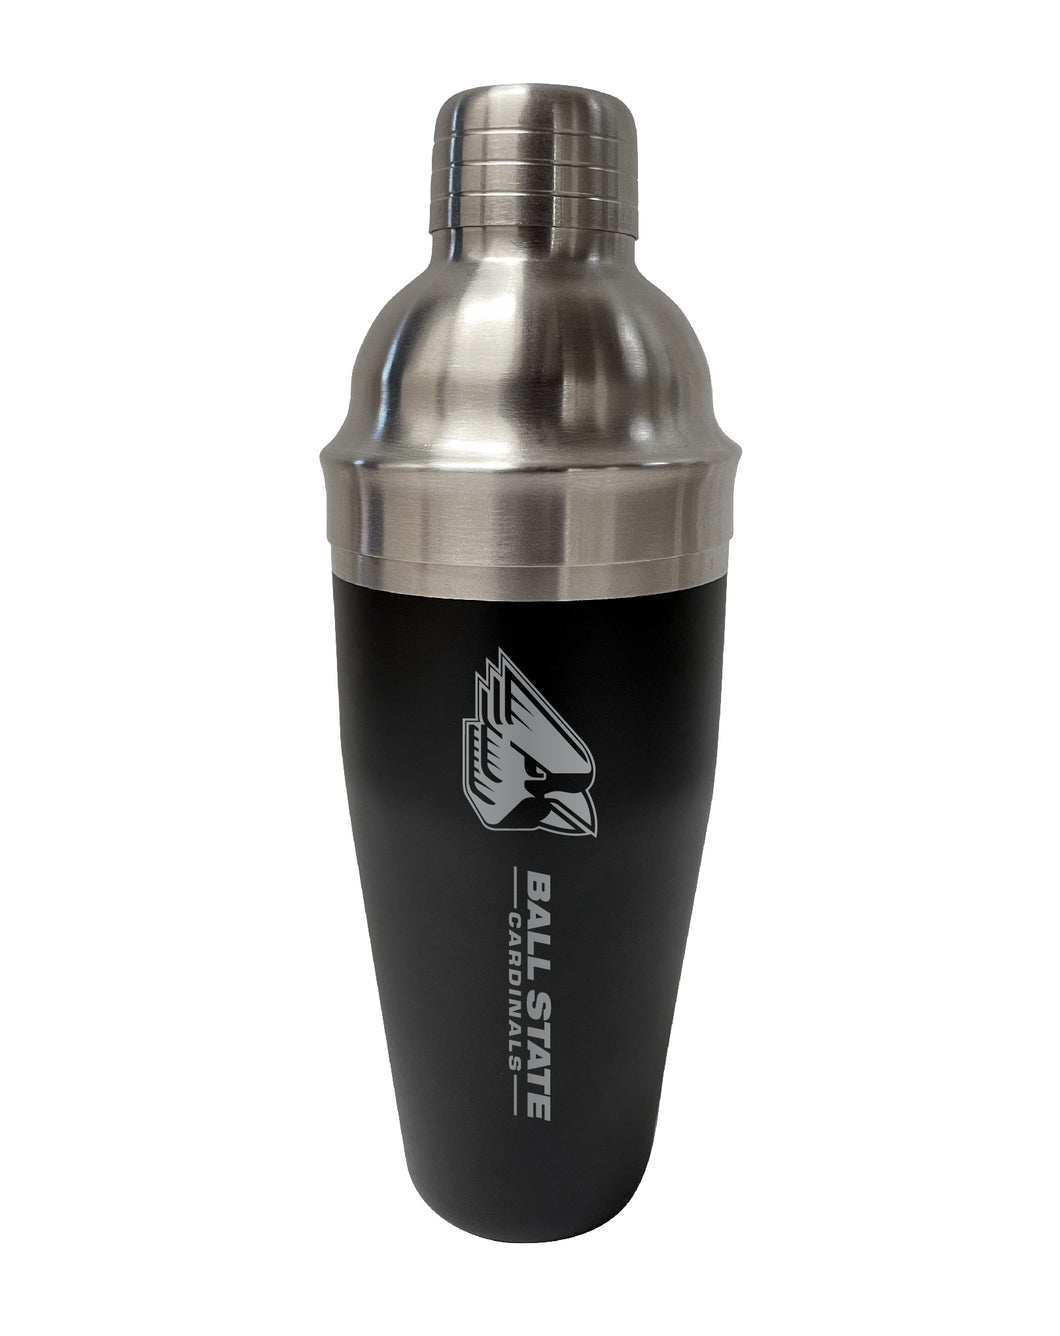 Ball State University NCAA Official 24 oz Engraved Stainless Steel Cocktail Shaker | College Team Spirit Drink Mixer